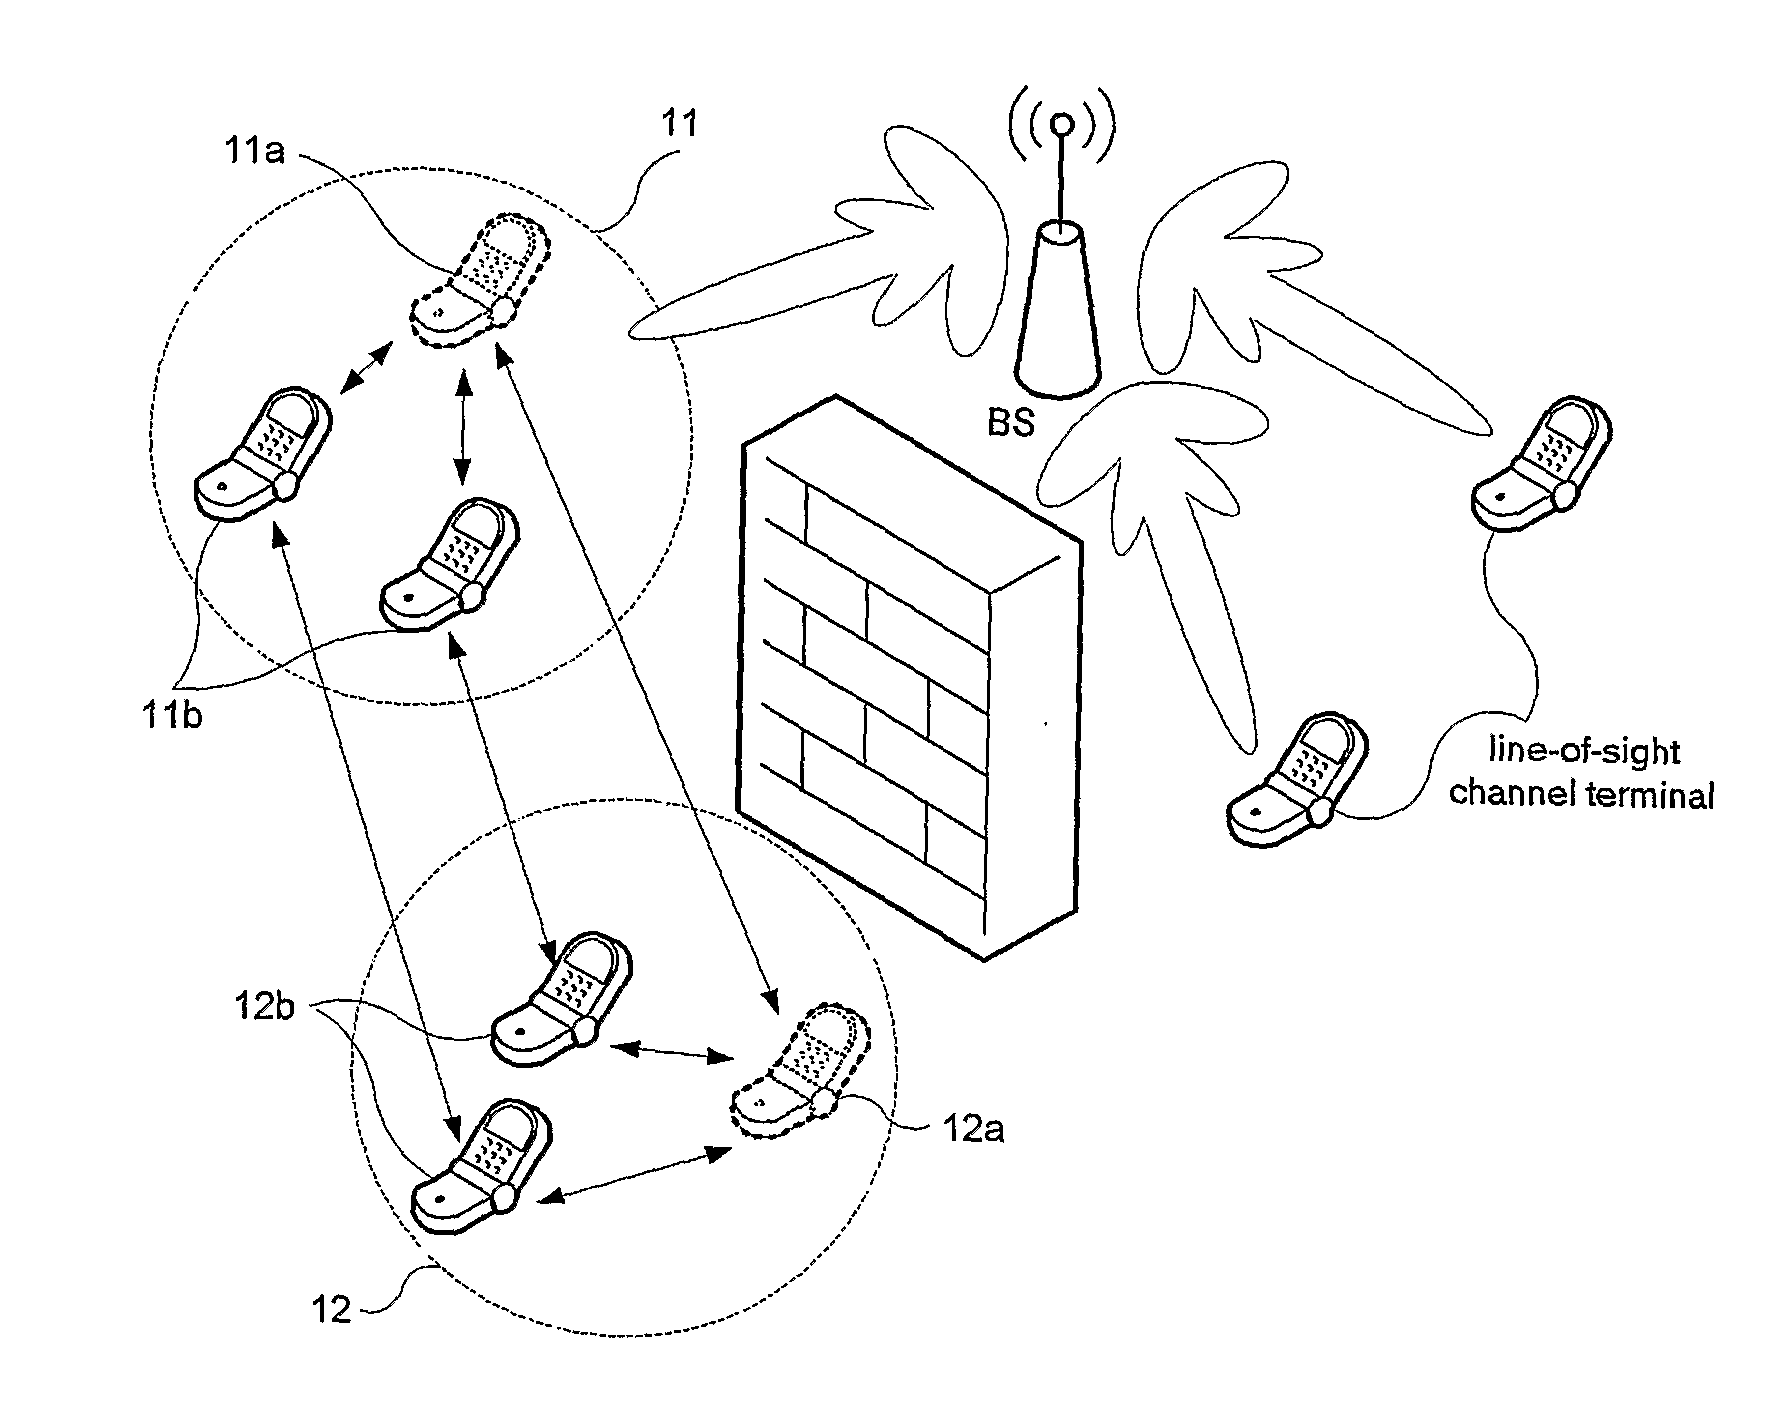 Method of communicating and establishing relay channel between base station and non-line-of-sight channel terminal in next generation cellular communication system